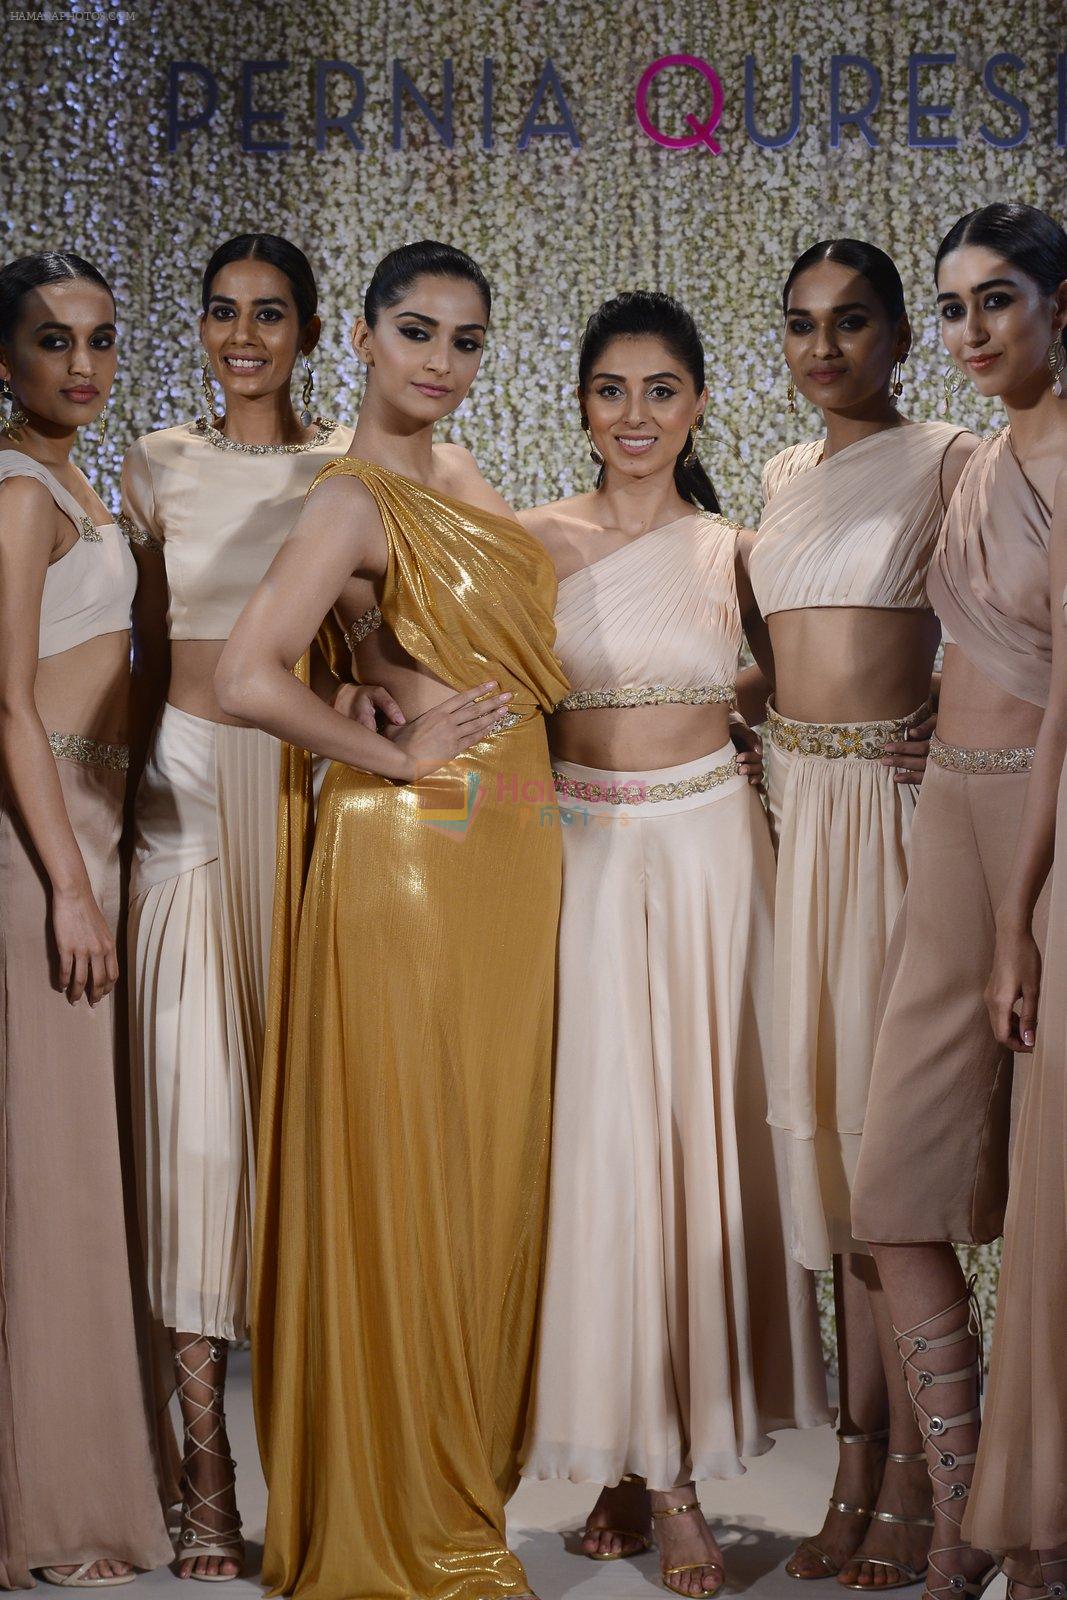 Sonam Kapoor walks the ramp for Pernia Qureshi's standalone show on 9th June 2016